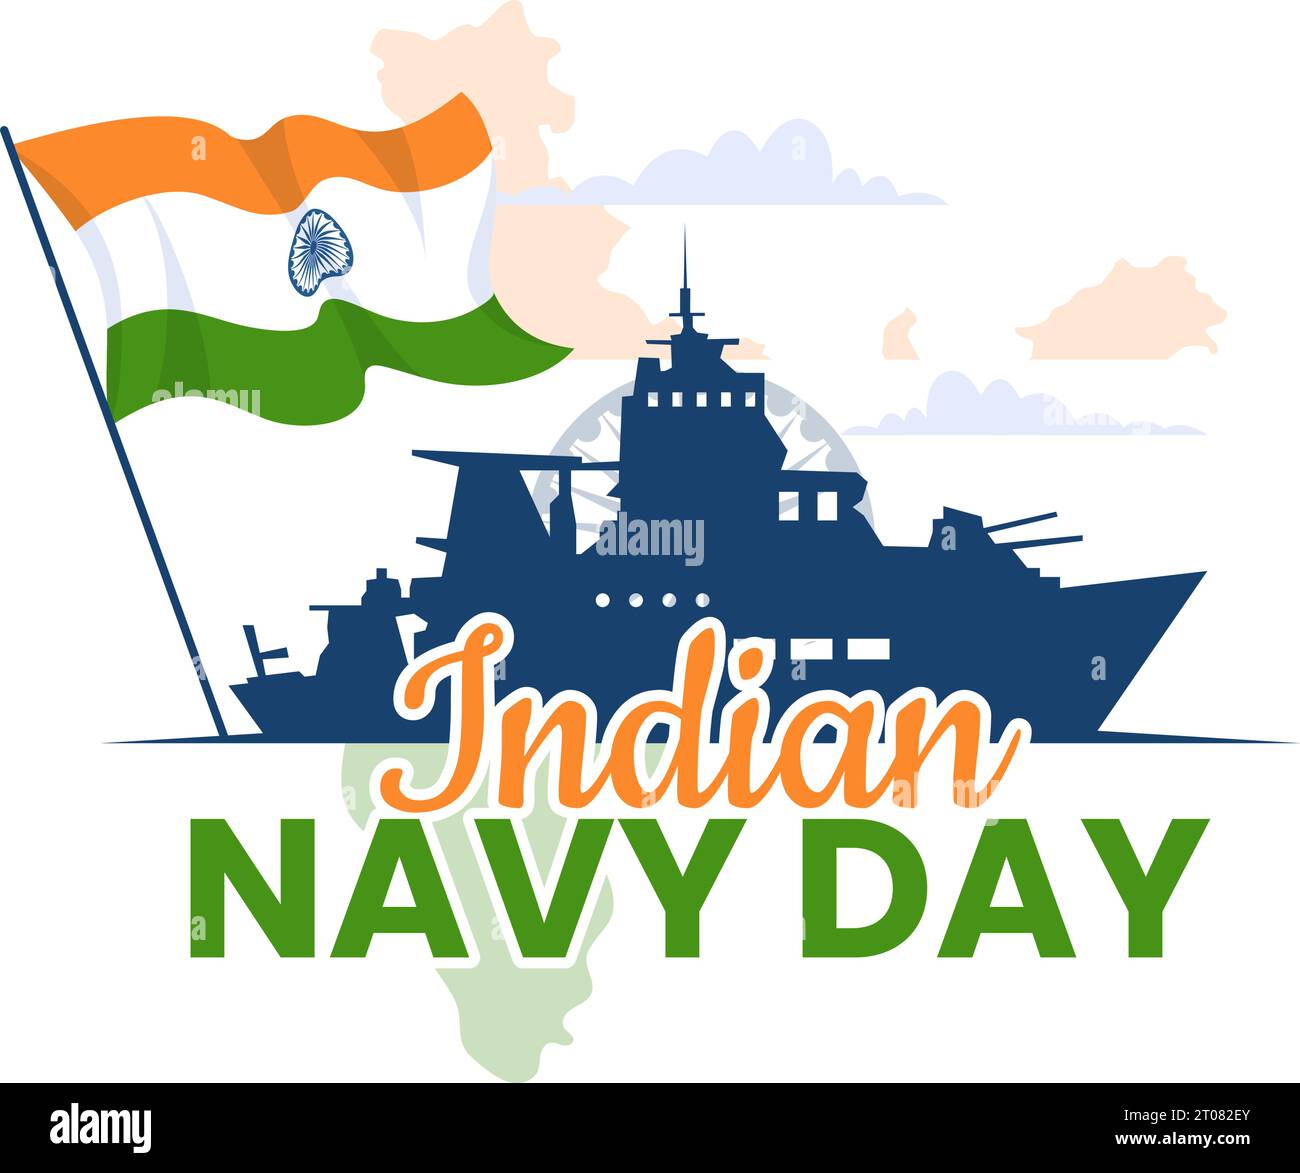 Indian Navy Day Vector Illustration on December 4 with Fighter Ships for People Military Army Saluting Appreciating Soldiers in Background Design Stock Vector